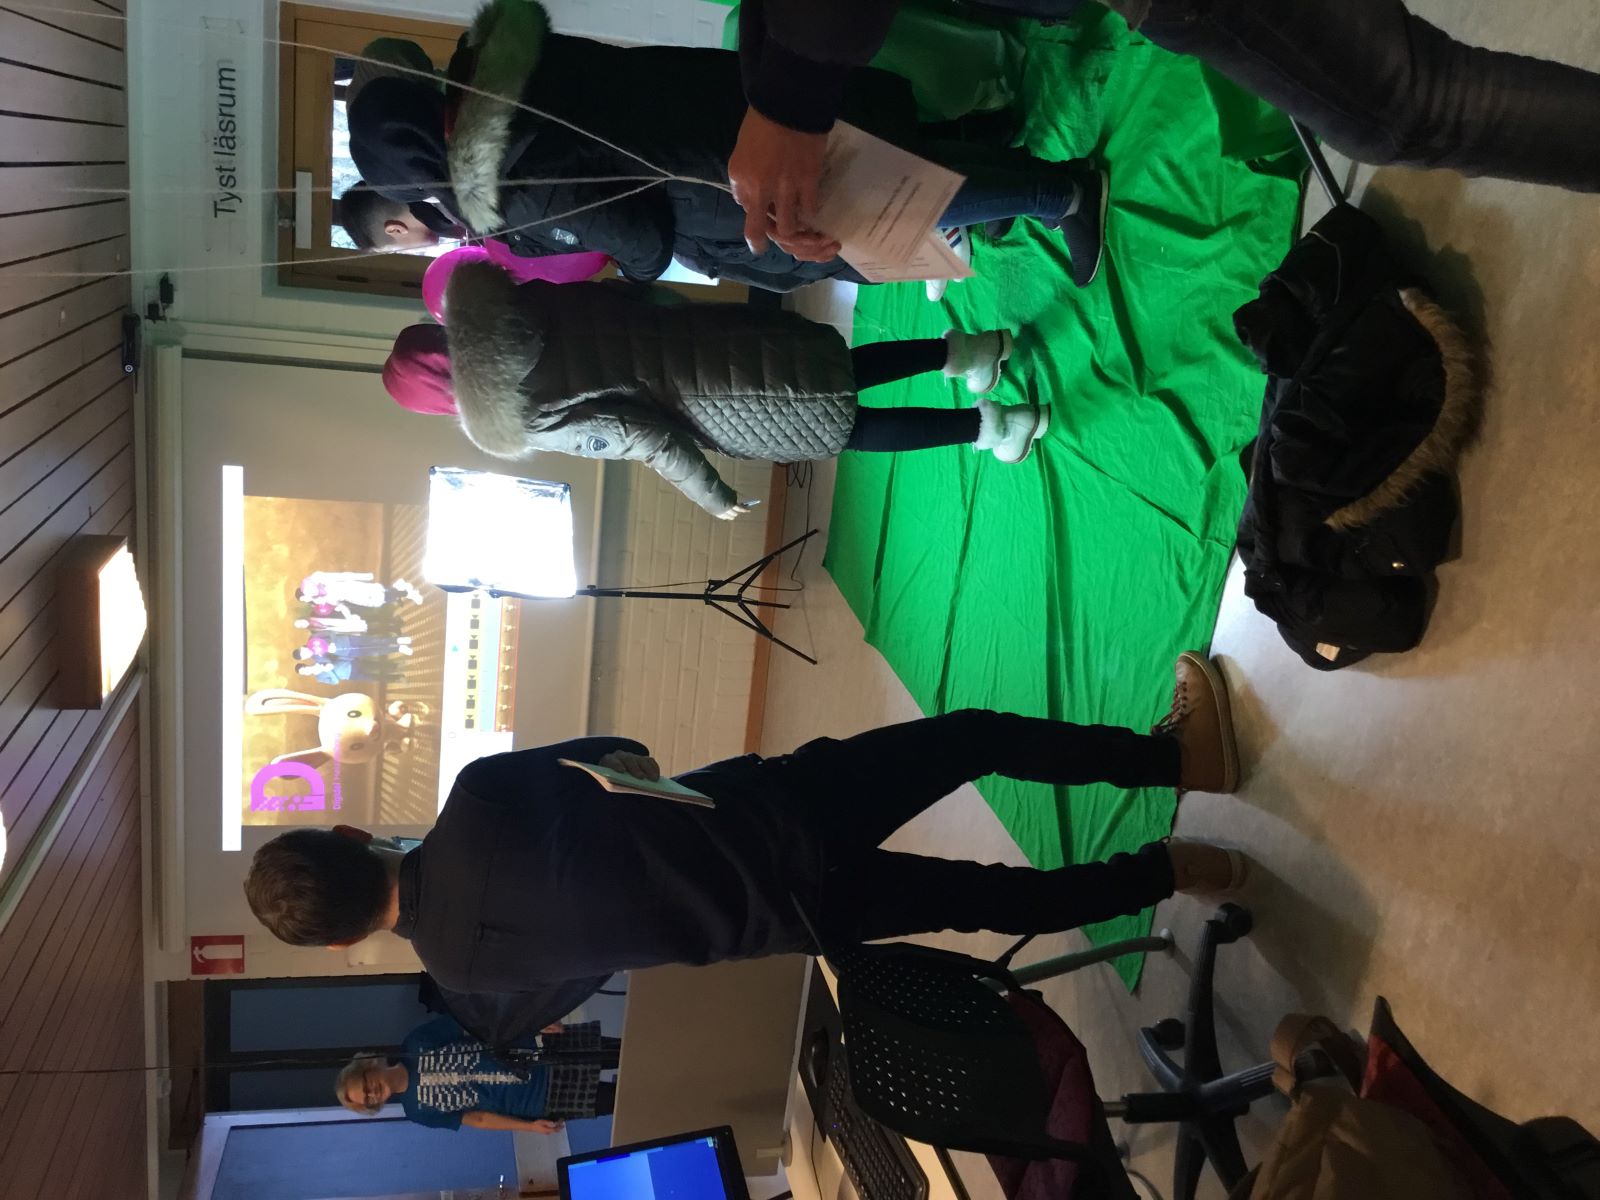 “Visitors at a workshop with green screen ” by Helsingborg Public Library is licensed under CC BY 4.0